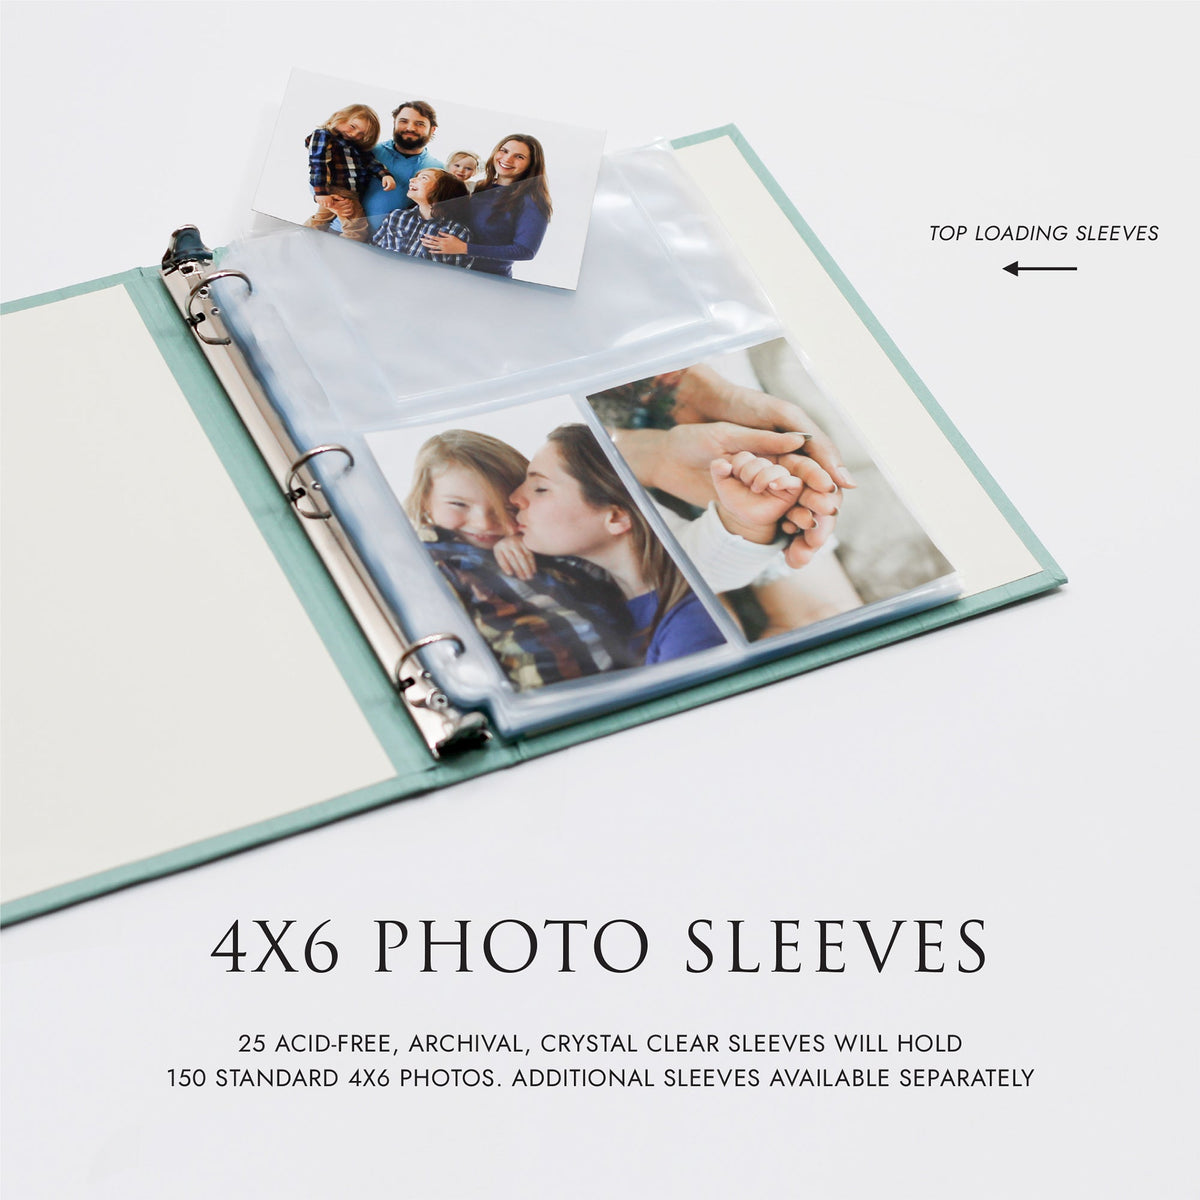 Large Photo Binder For 4x6 Photos | Cover: Ocean Blue Vegan Leather | Available Personalized